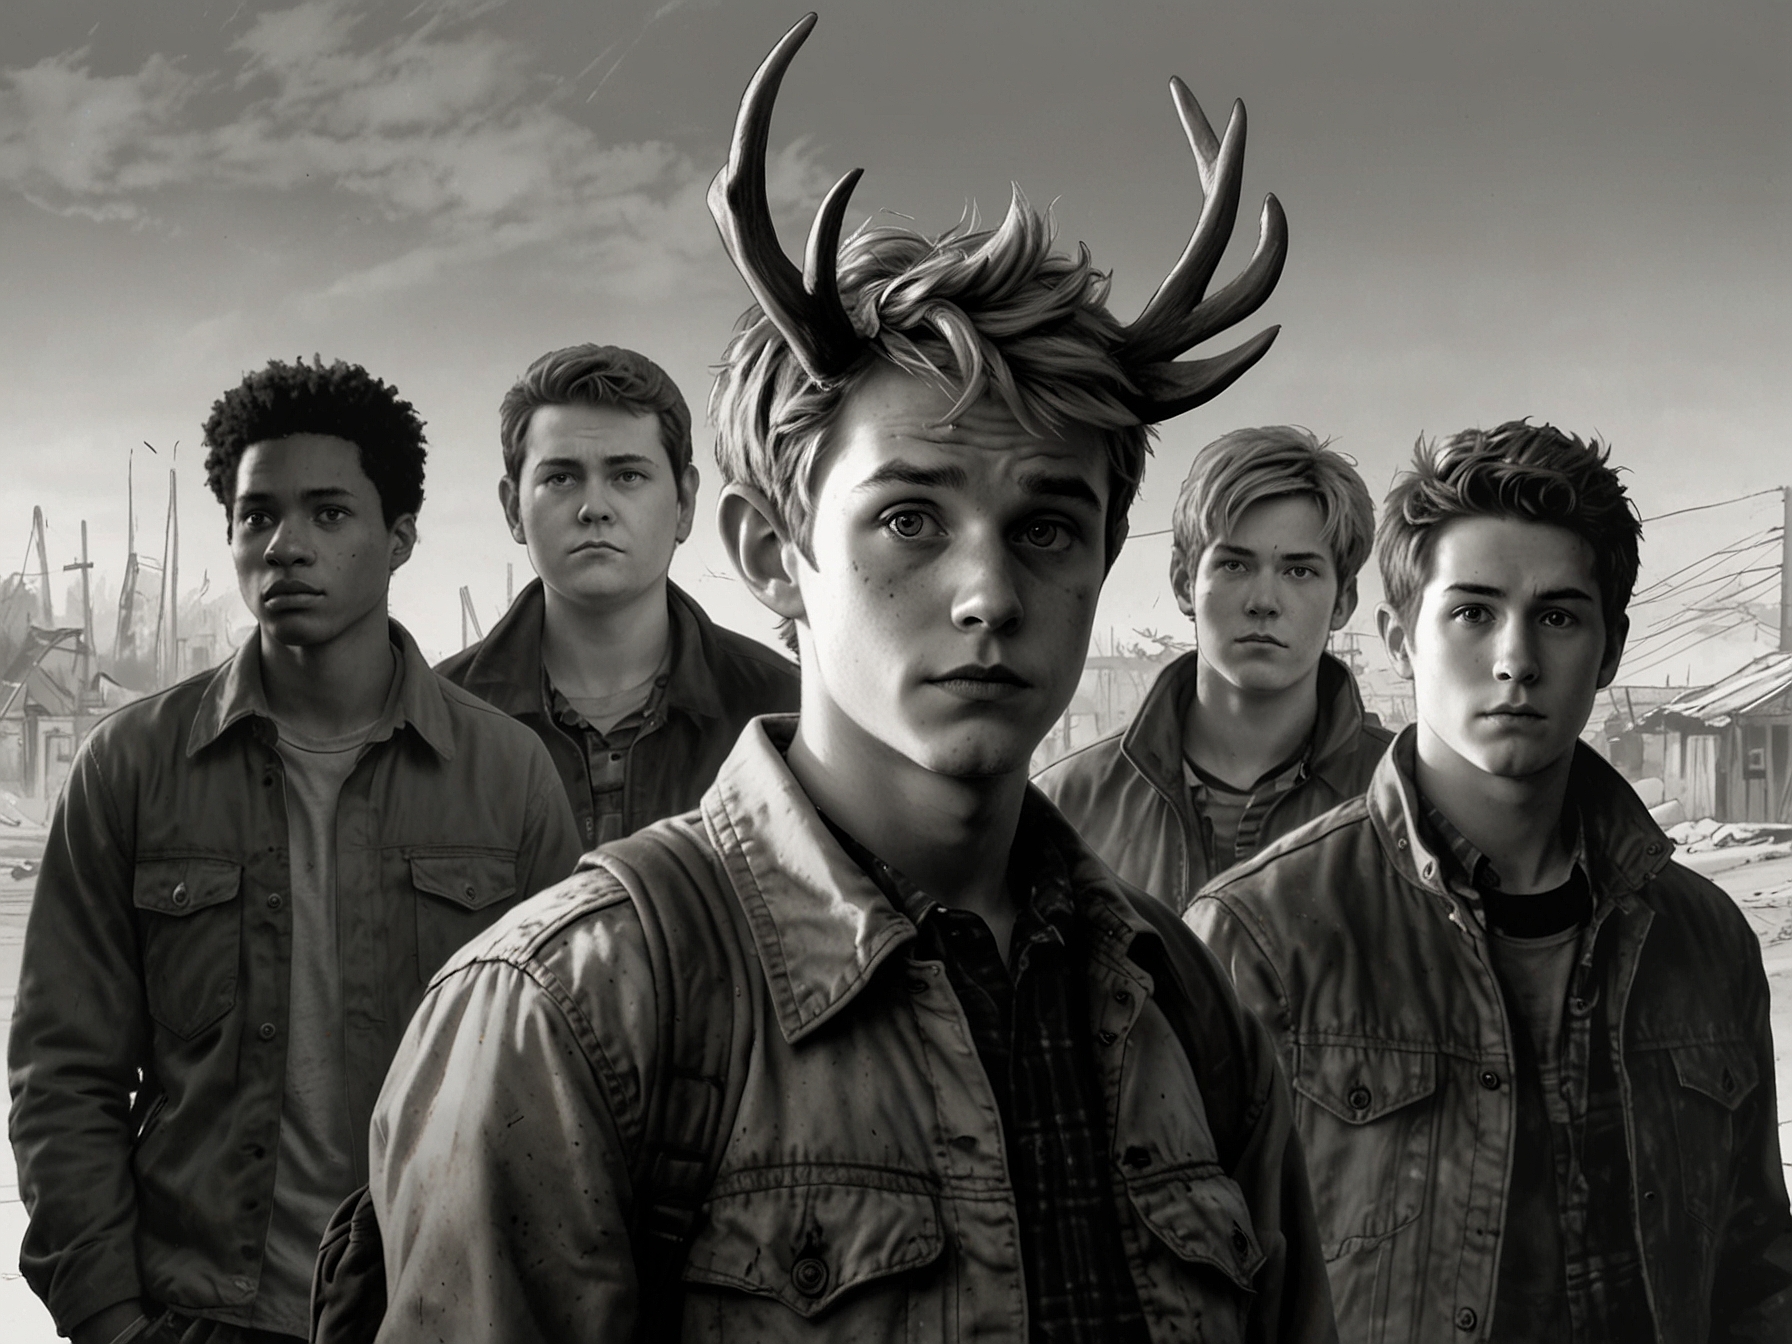 A promotional image of Sweet Tooth Season 3 featuring Gus, the half-human half-deer boy, navigating a thrilling post-apocalyptic world alongside his friends.